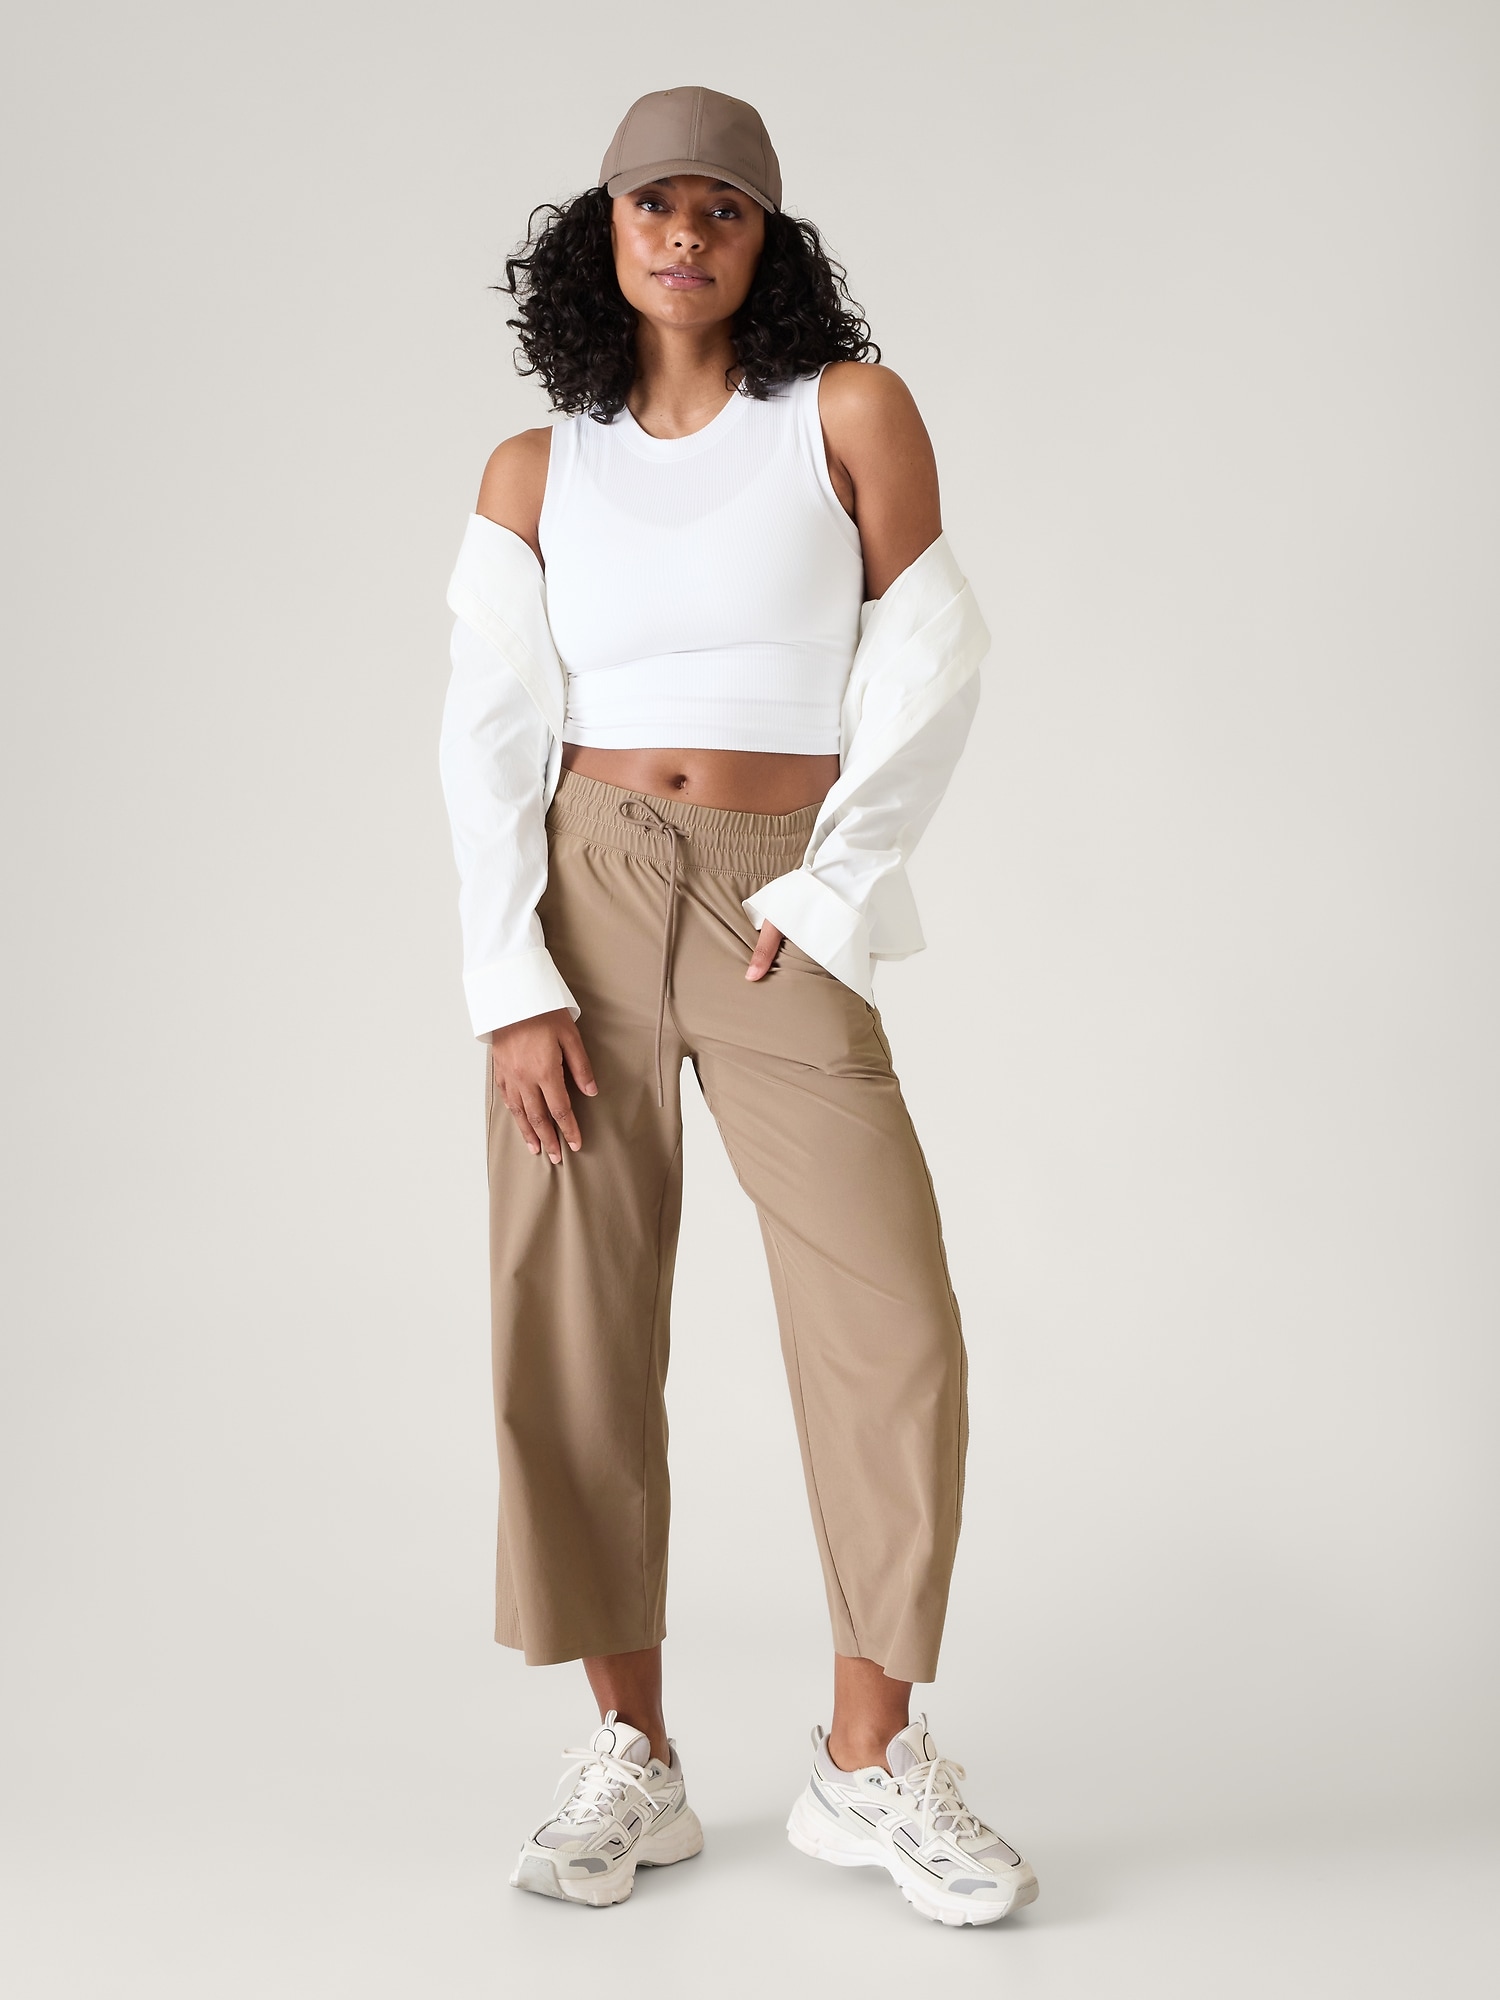 Avia Stretch Cropped Pants for Women